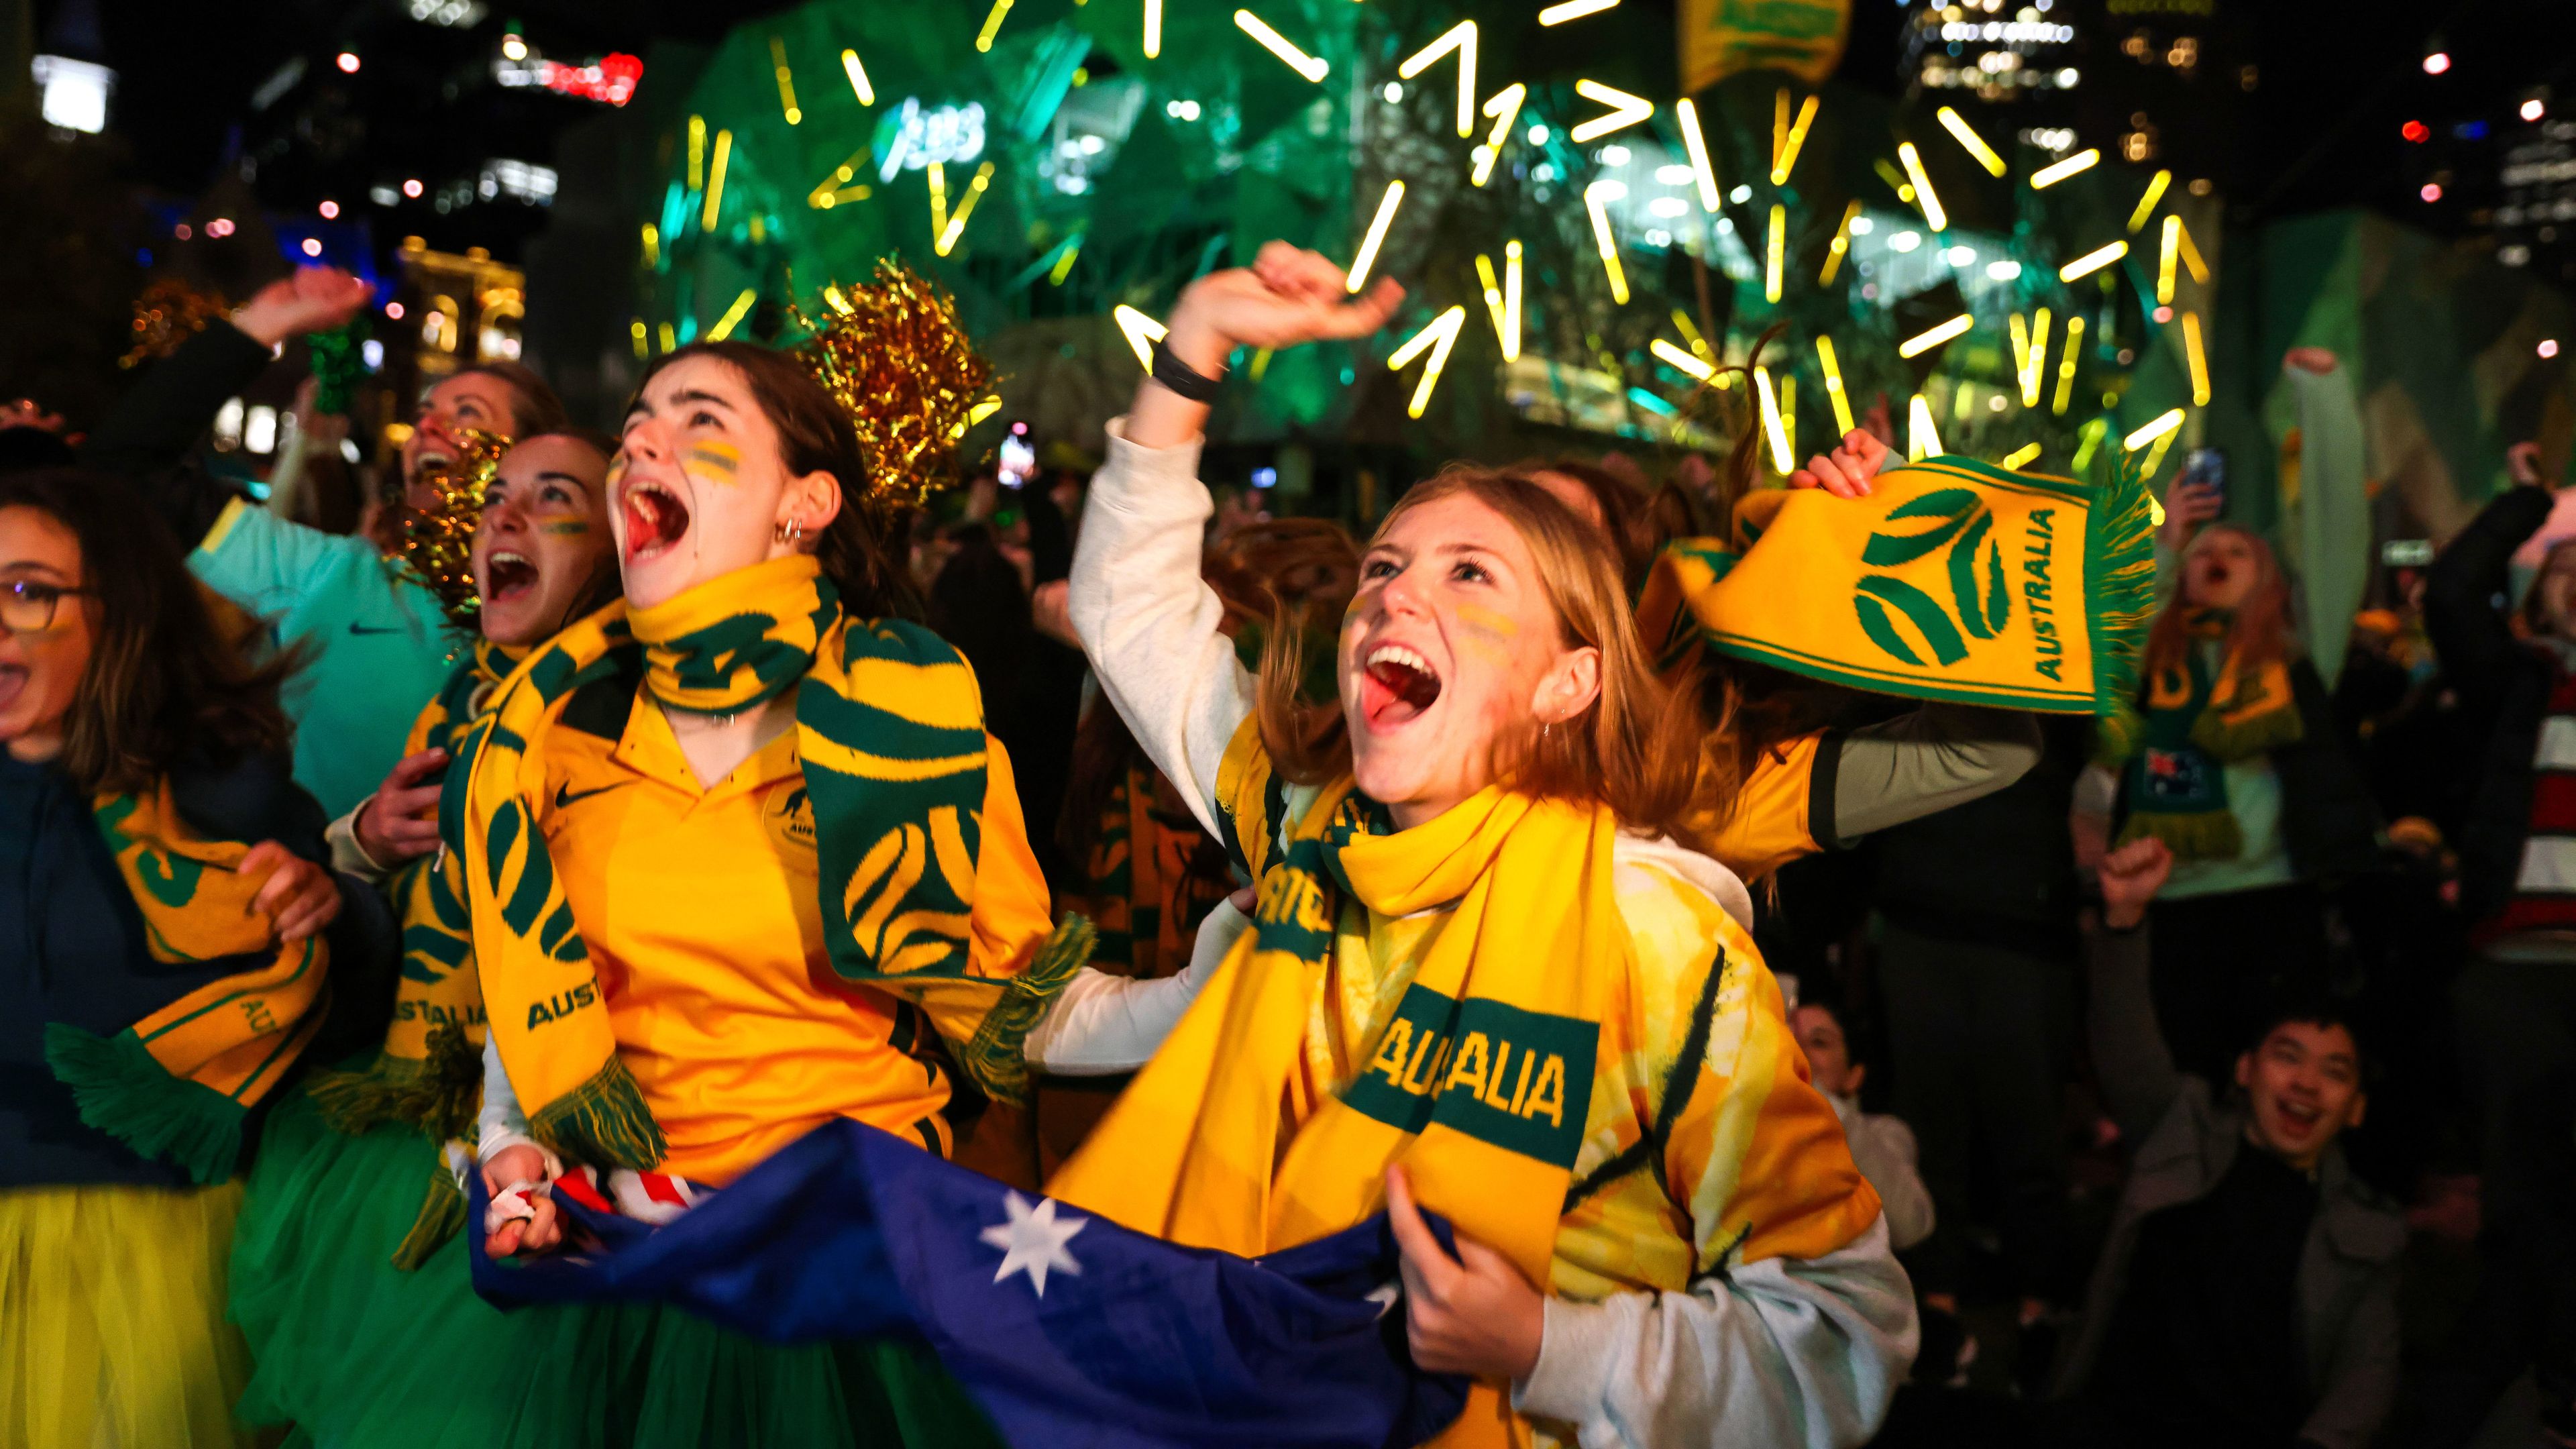 Melissa Barbieri: A public holiday should not be the legacy this World Cup leaves